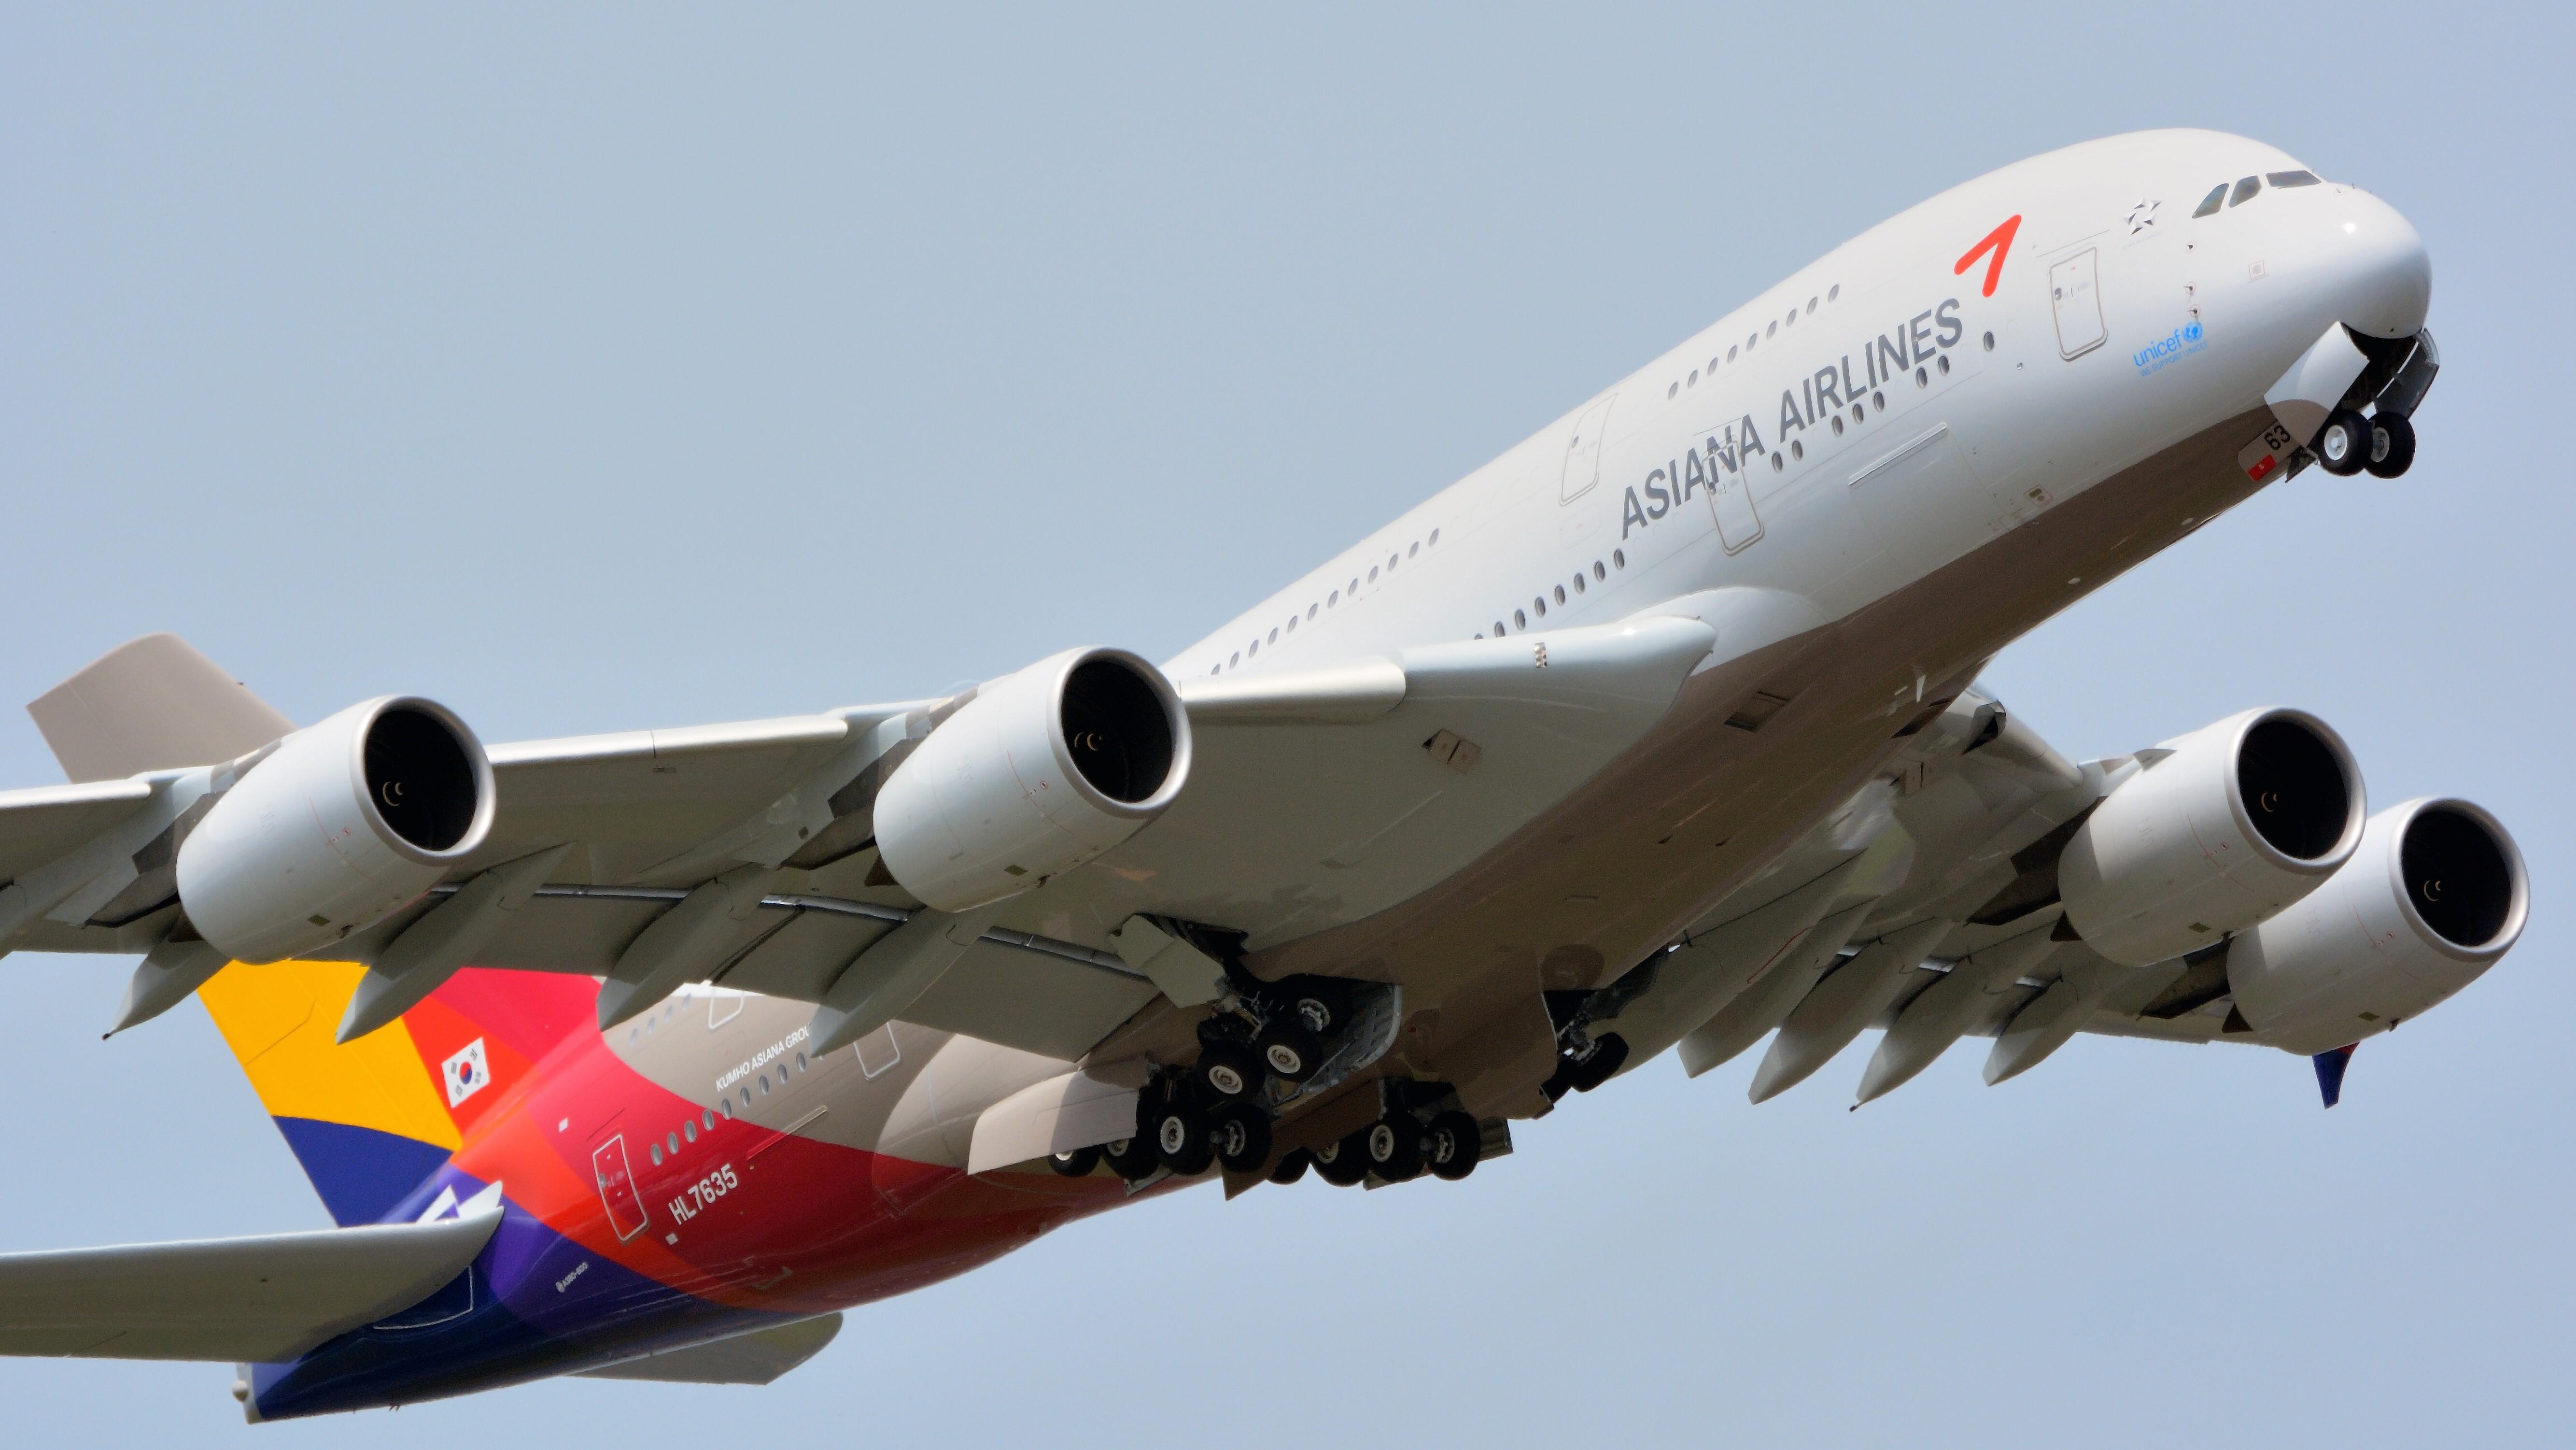 Asiana Airlines A380-800